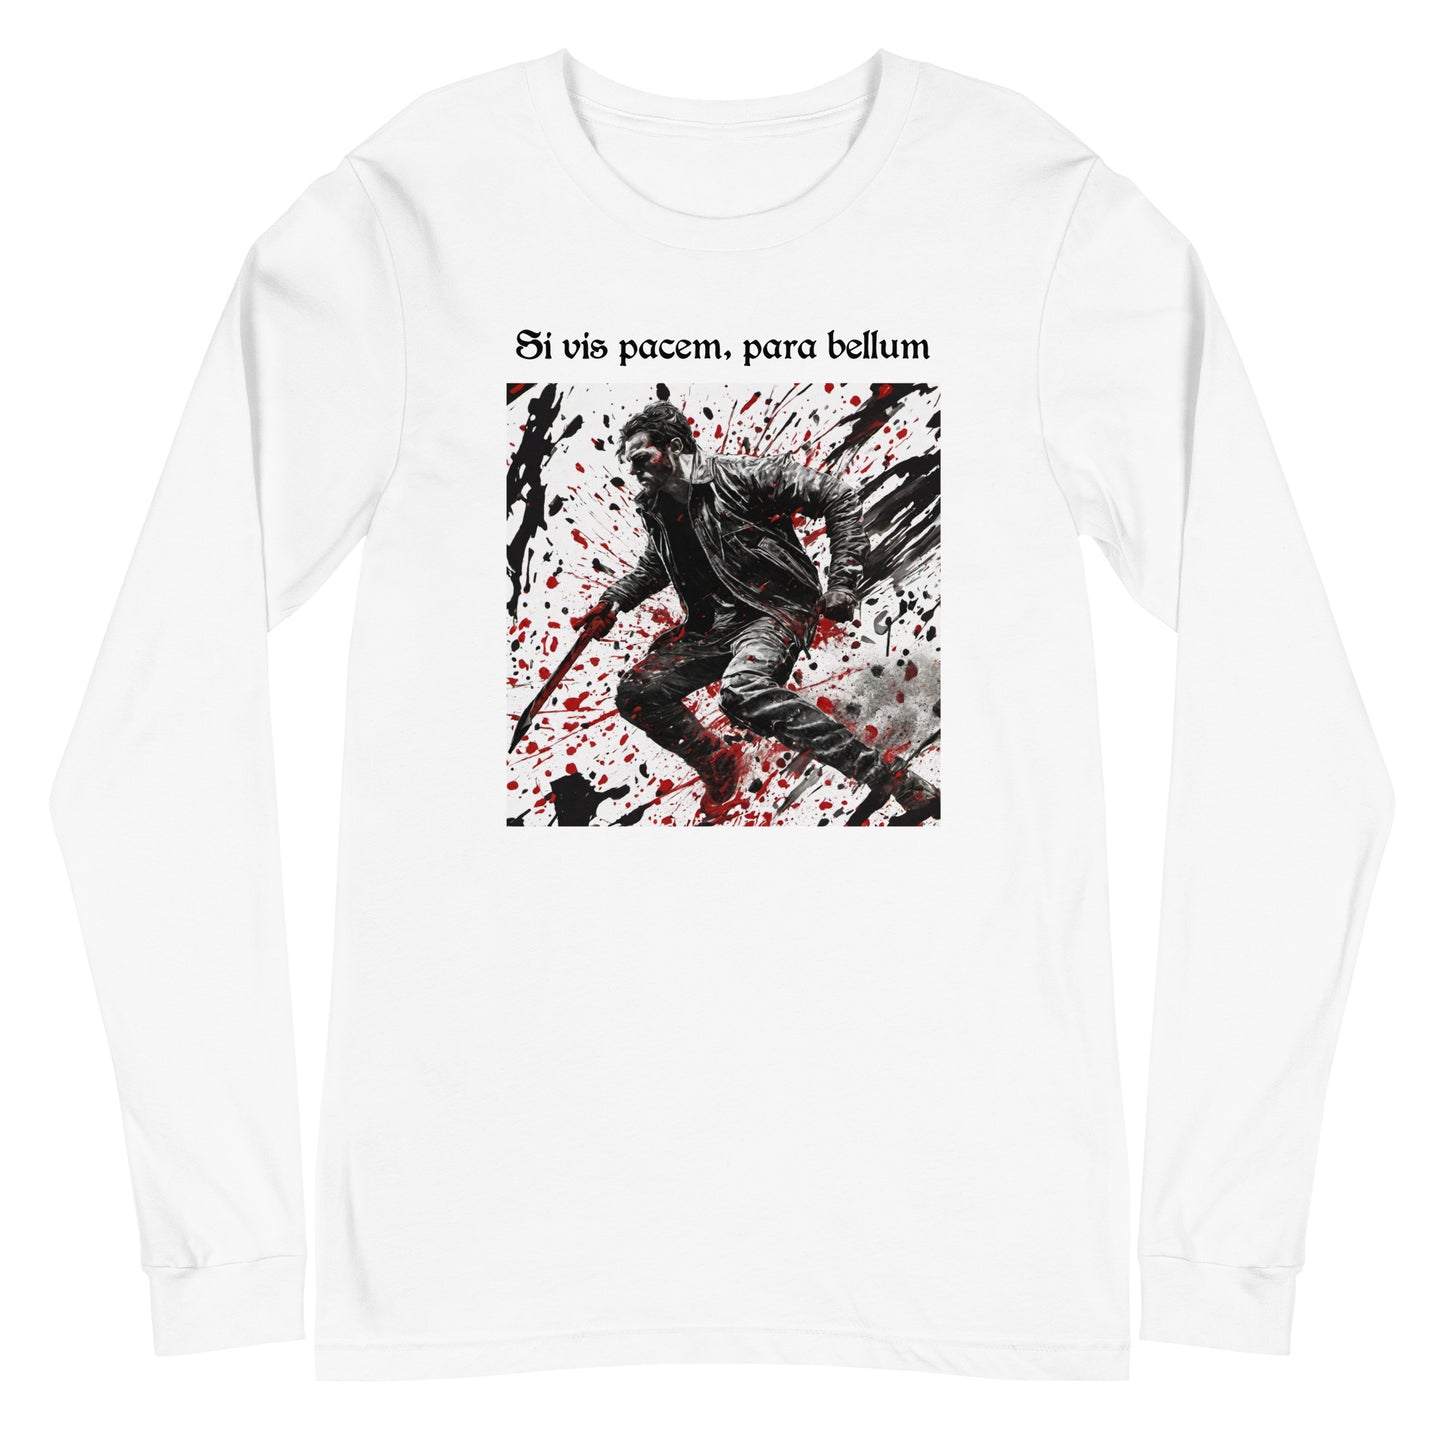 If You Want Peace, Prepare for War Men's Long Sleeve Tee White